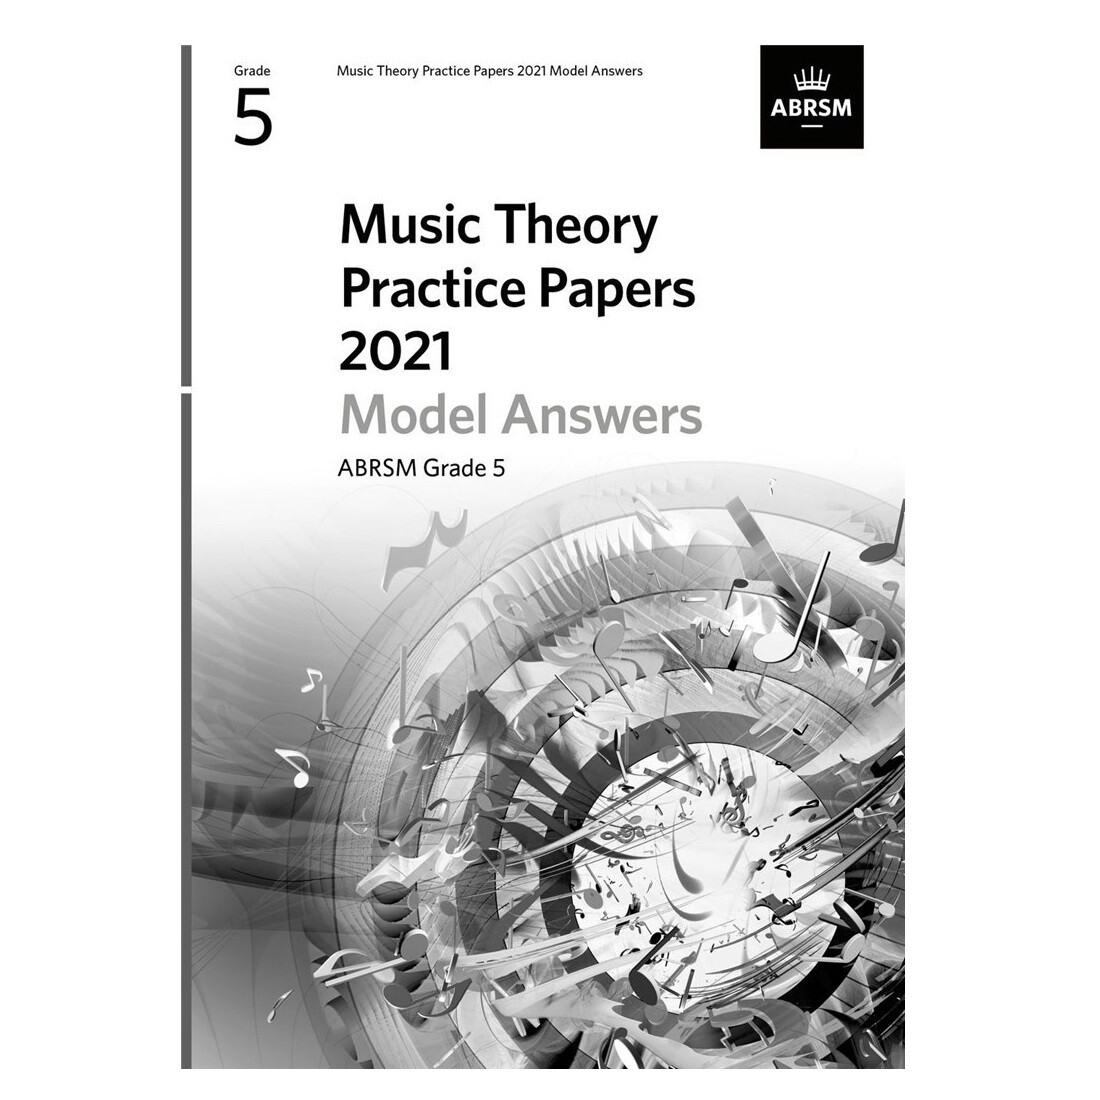 ABRSM Music Theory Practice Papers 2021 Model Answers: Grade 5